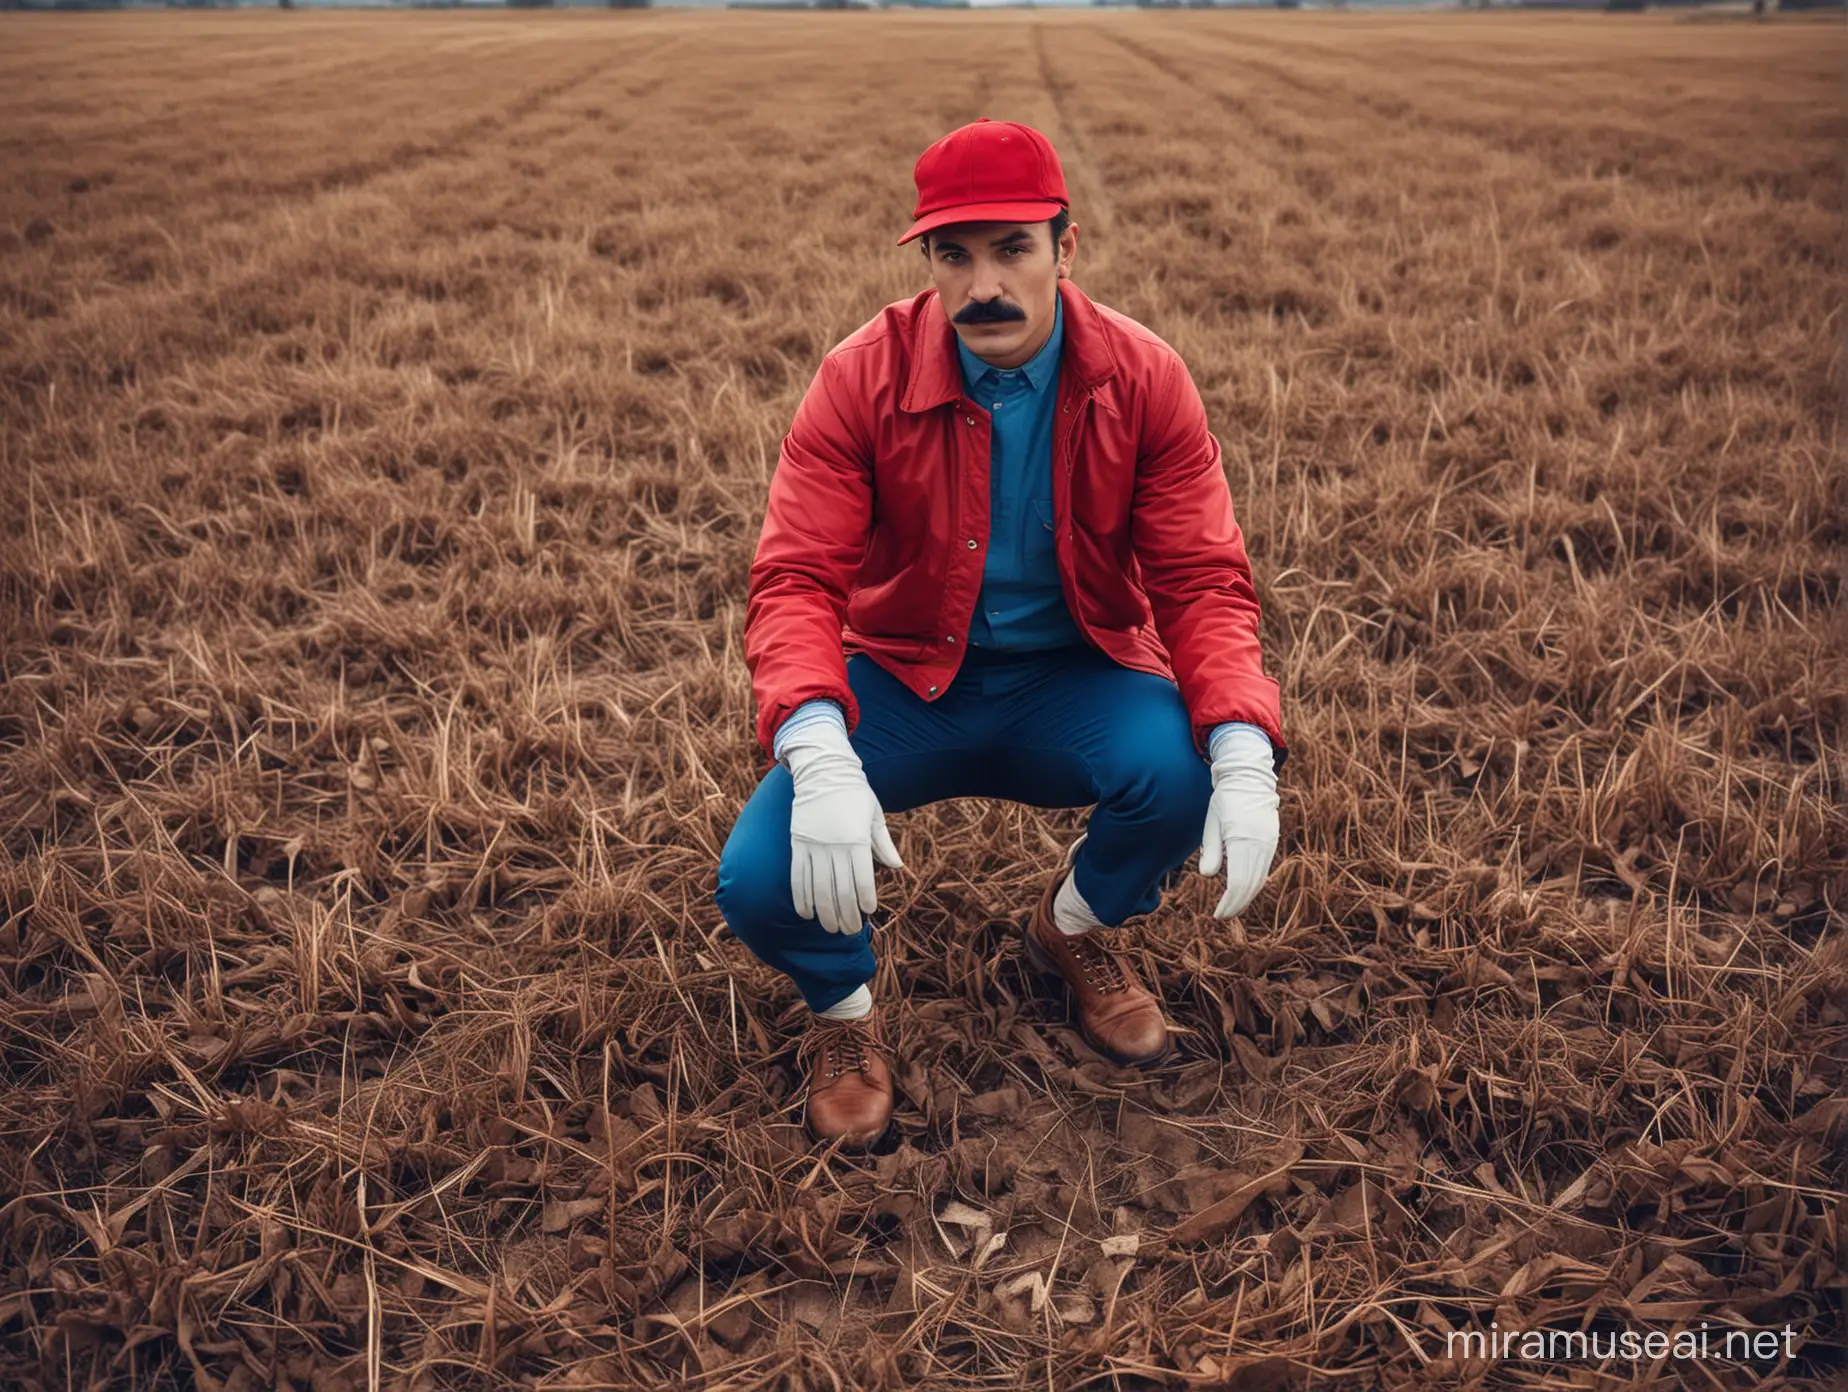 Stylish Man with Black Mustache and Red Cap in Cinematic Field